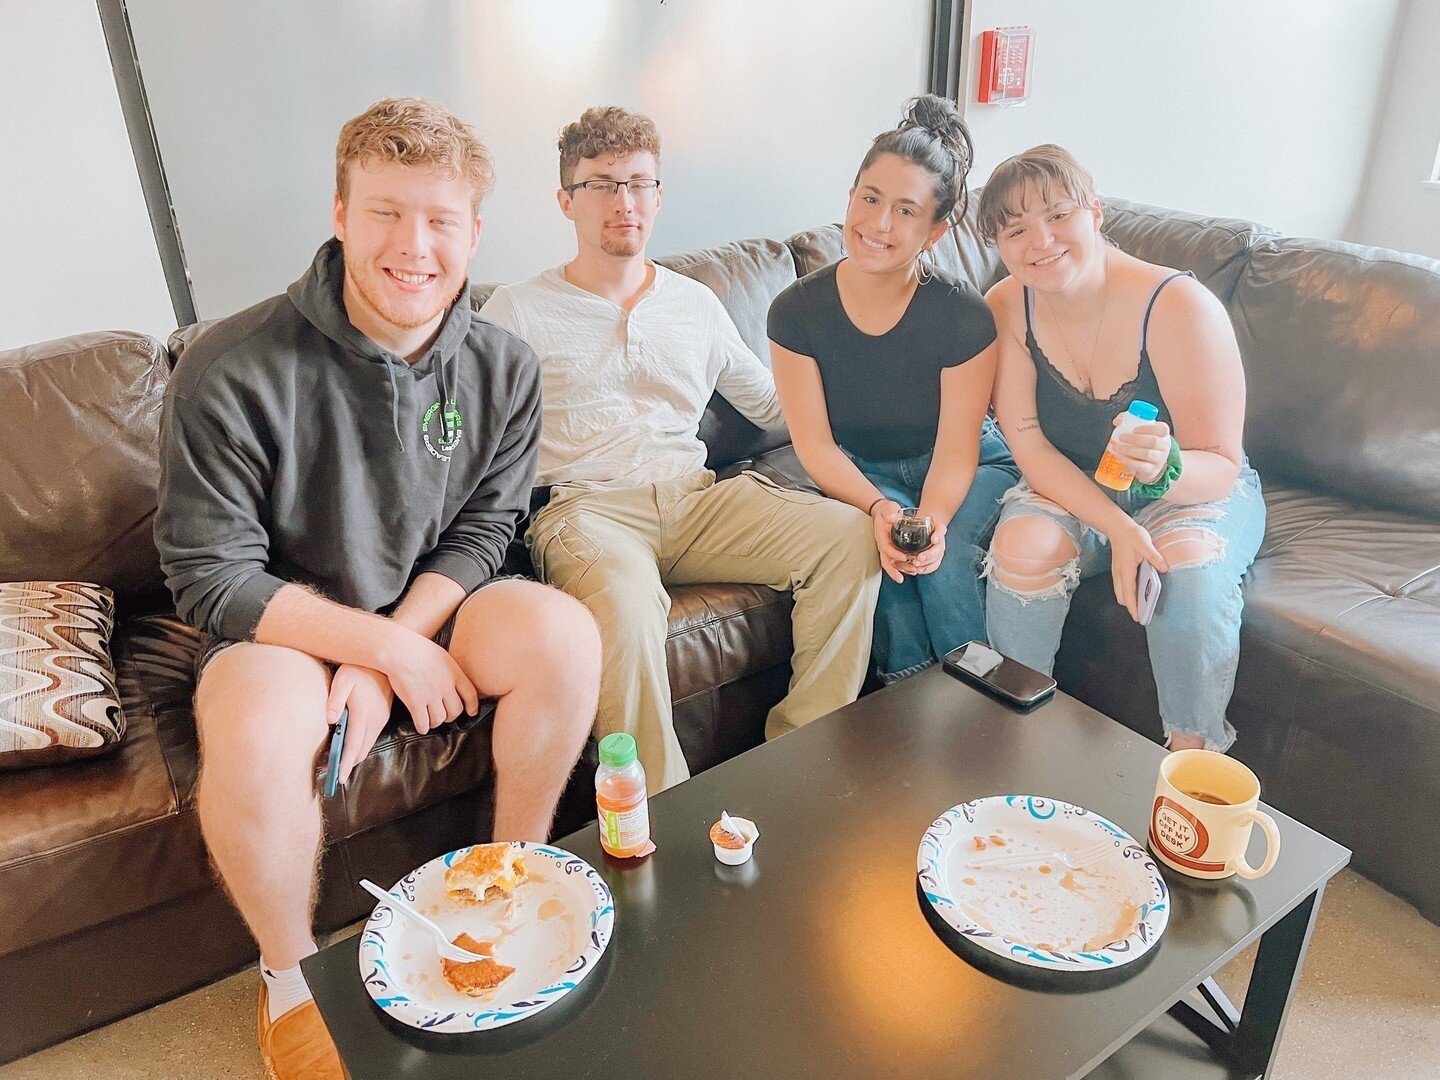 Living with friends in the BEST! 🥰⁠
⁠
Living with friends at River Gate is even BETTER! 😎⁠
⁠
See why River Gate has the best reputation for Student Housing in Athens! Tour today: In-person OR virtually! ⁠
⁠
📲740-589-3000